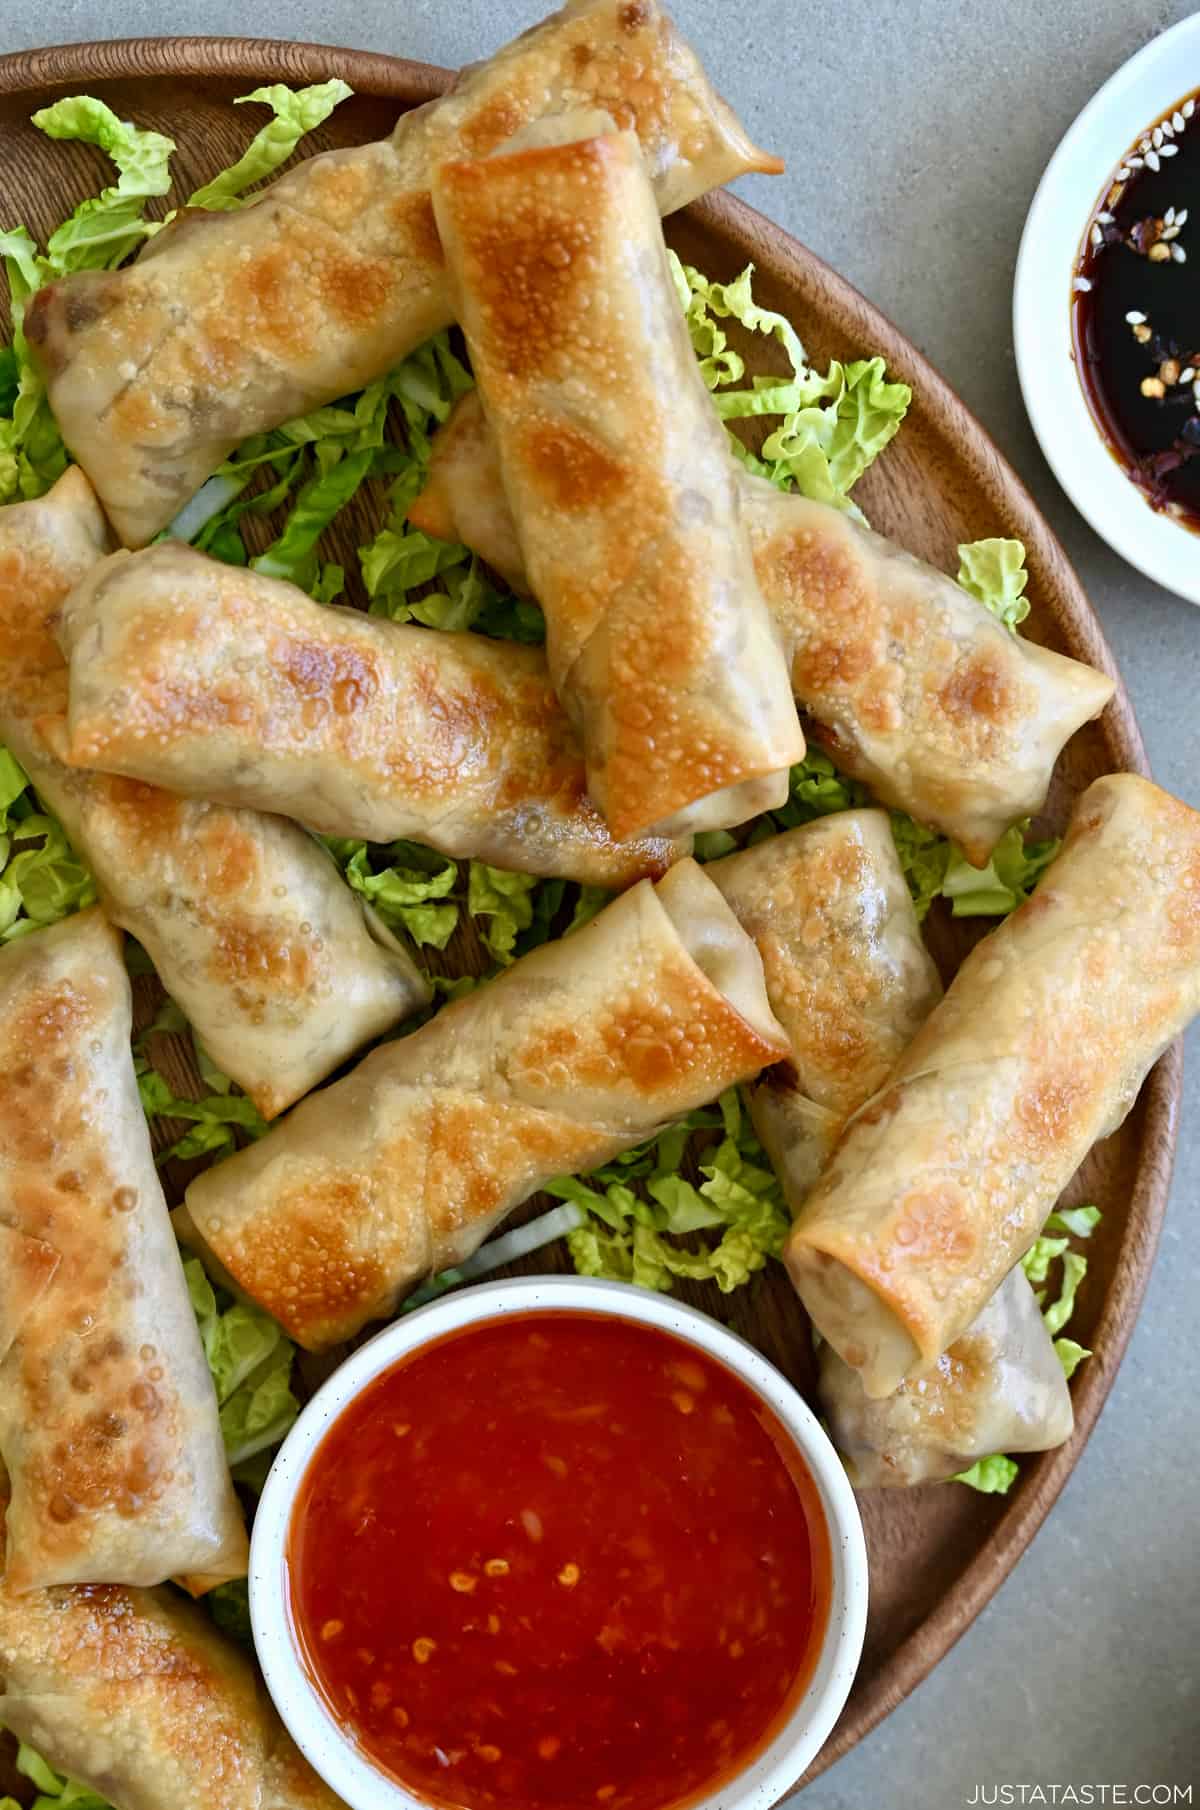 Golden brown baked chicken spring rolls atop a bed of shredded green cabbage next to a small bowl containing Thai sweet chili sauce.